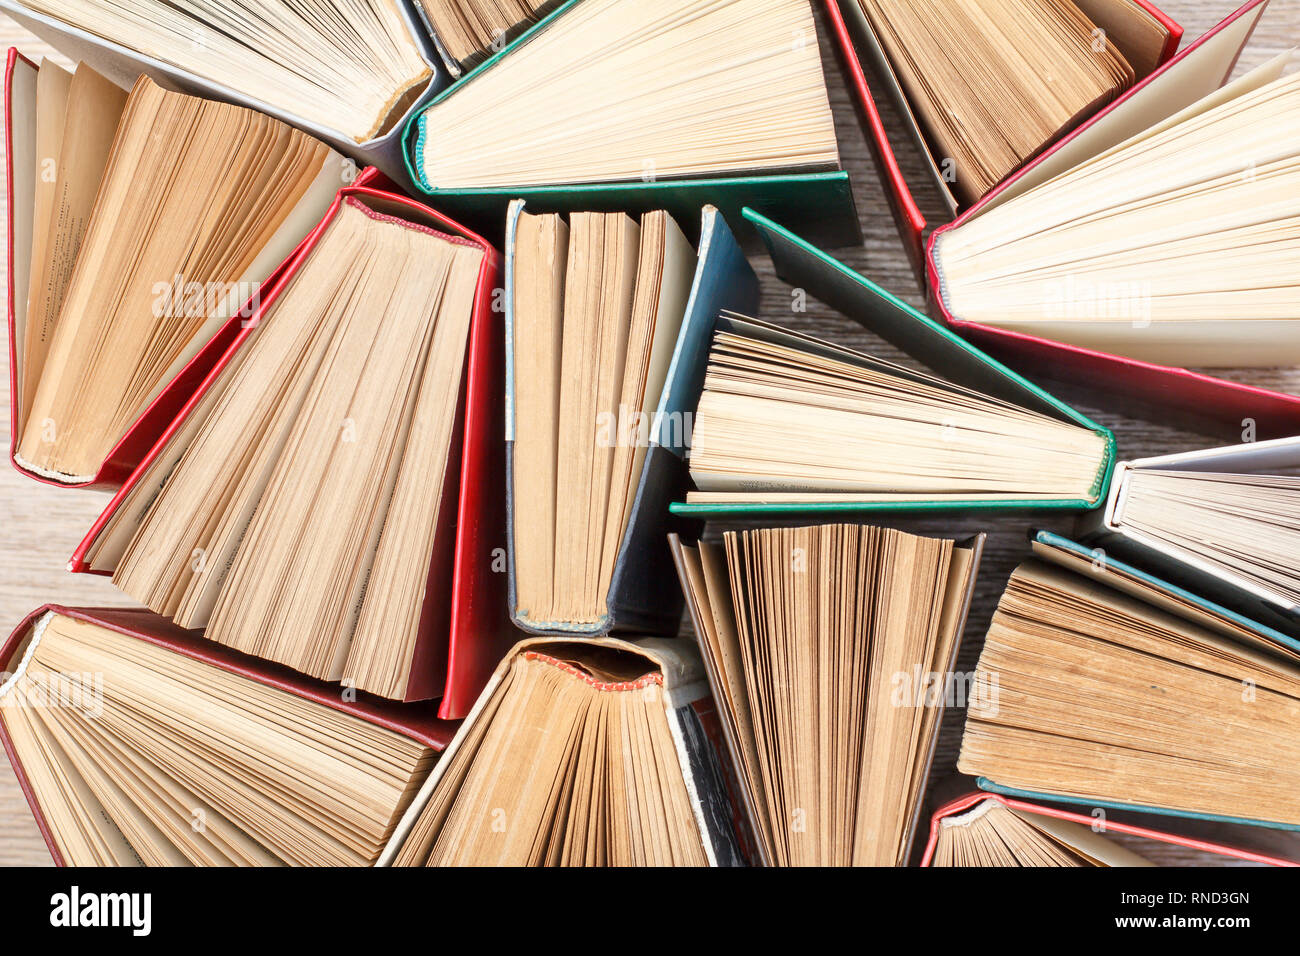 Large Number Of Colorful Books Used Hardback Books View From Above Education Background Stock Photo Alamy